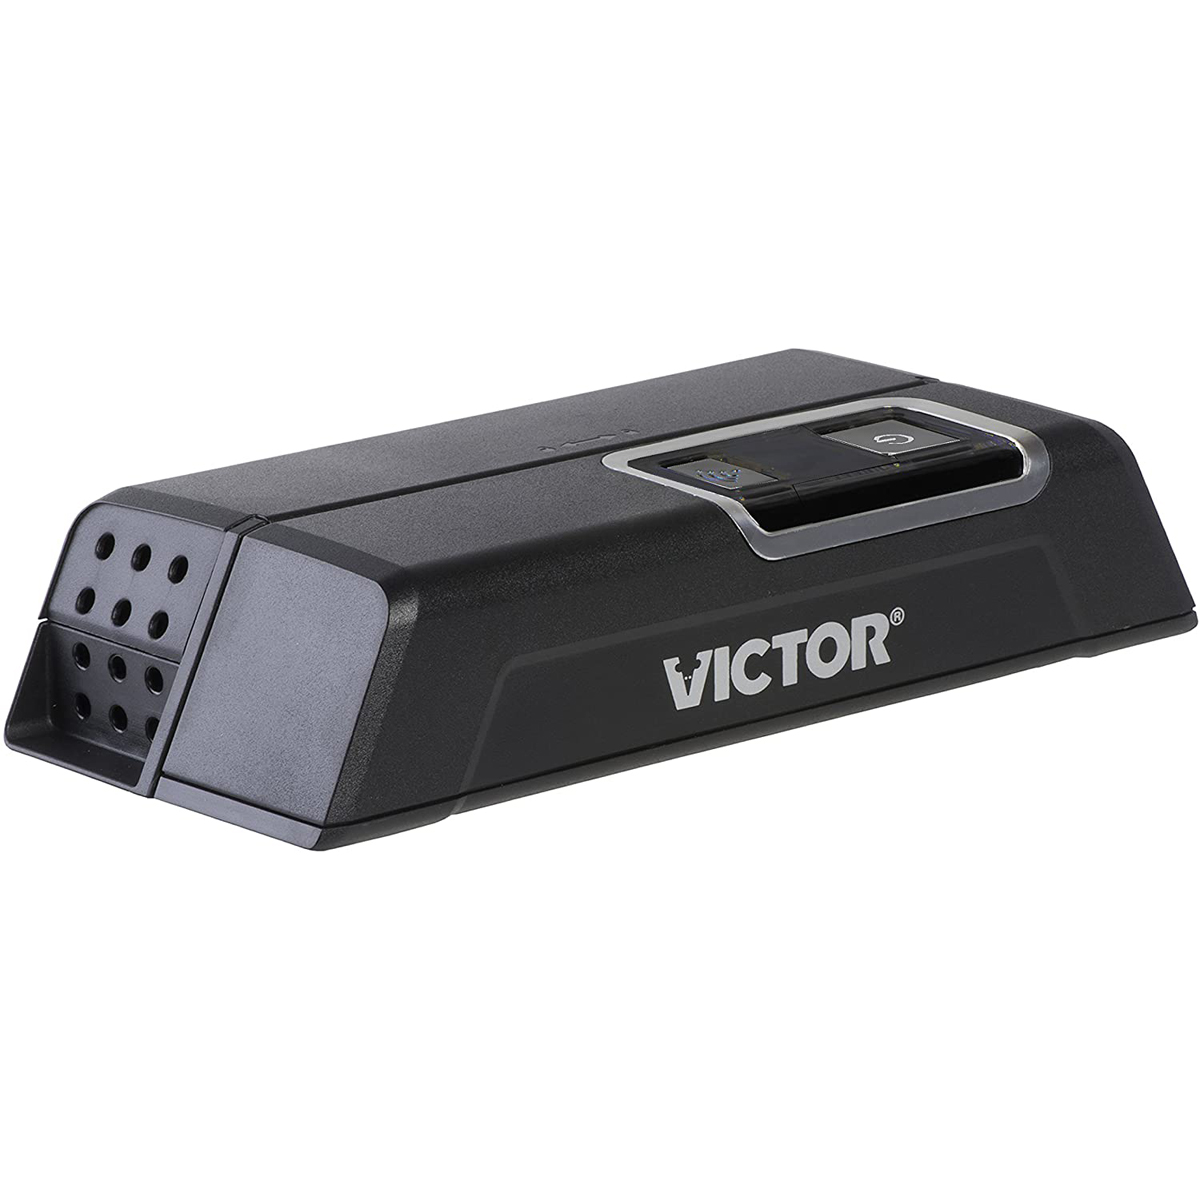 Picture 1 for Victor Wifi Elec Mouse Trap